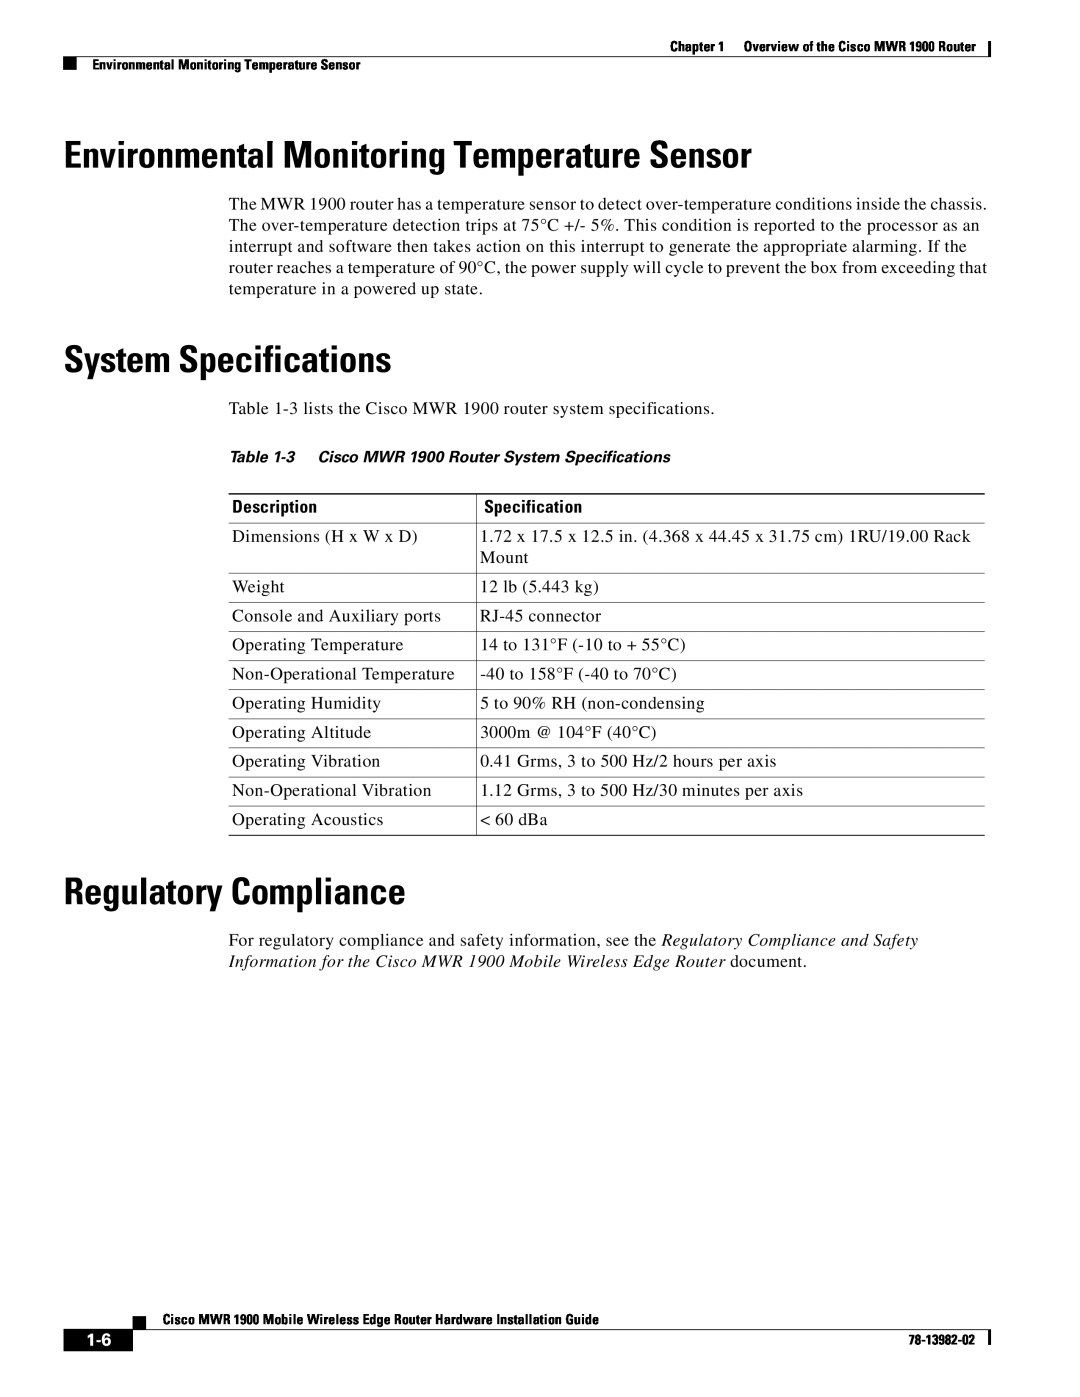 Cisco Systems MWR 1900 manual Environmental Monitoring Temperature Sensor, System Specifications, Regulatory Compliance 